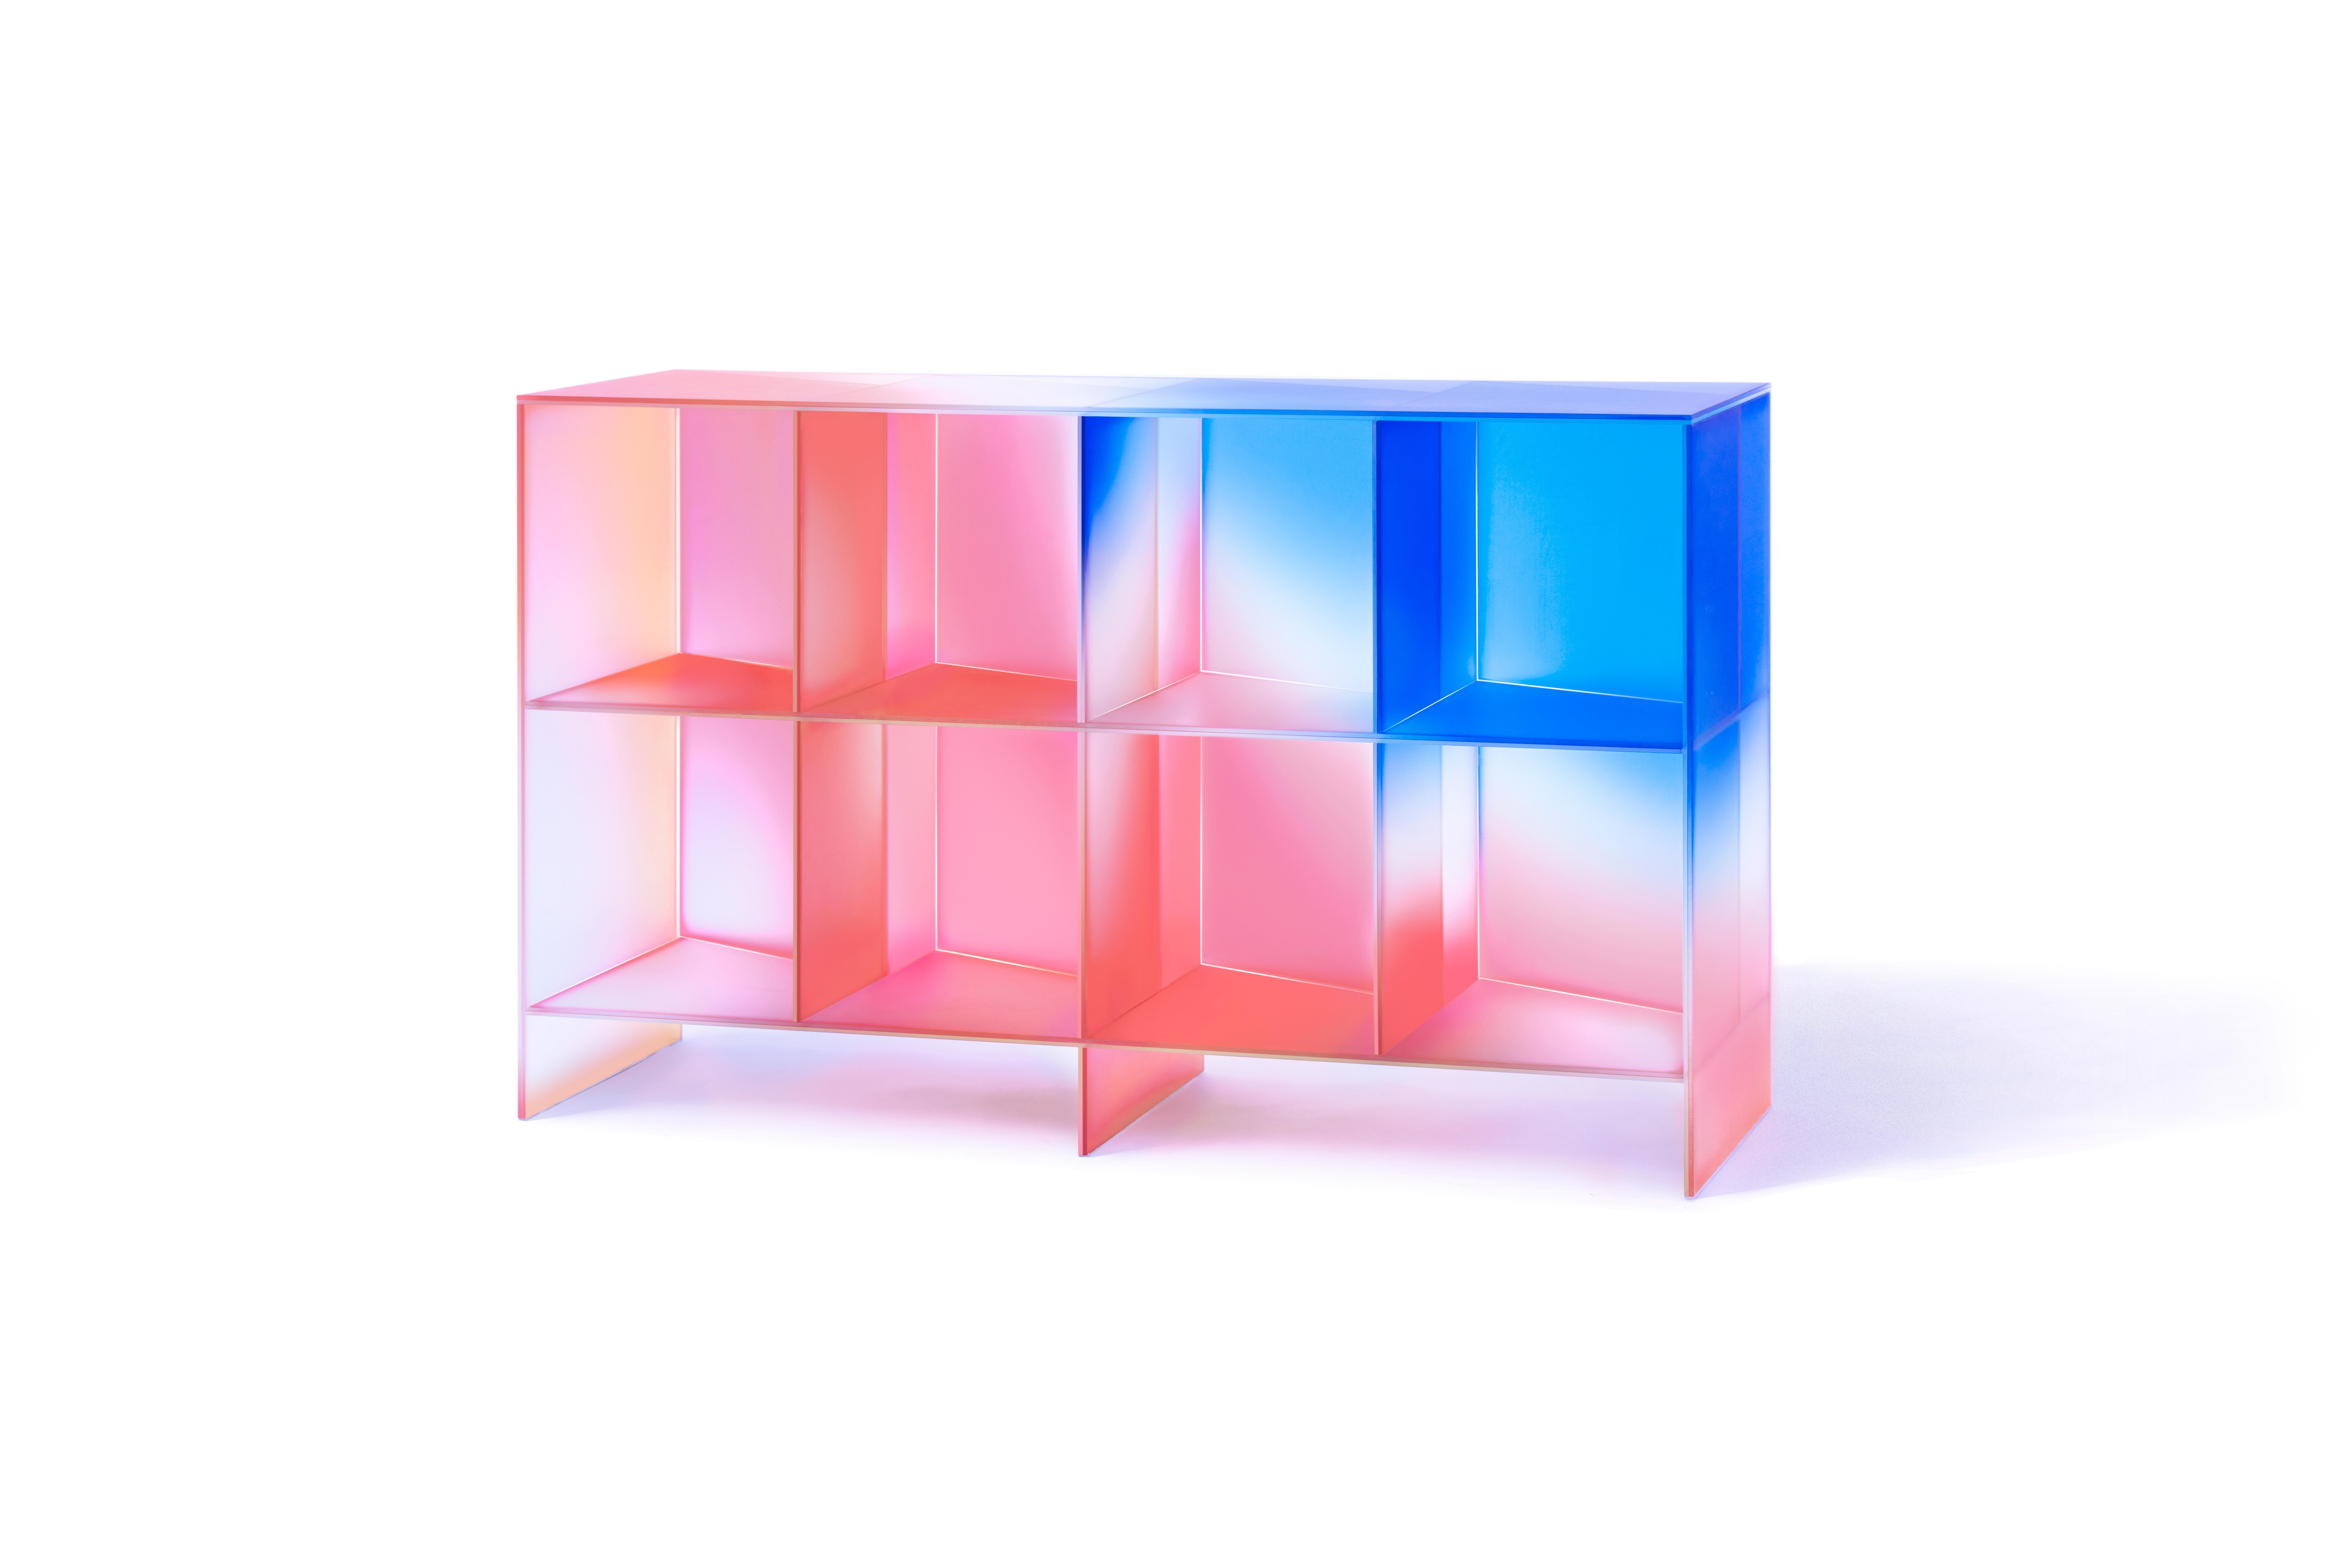 'HALO' collection by Buzao - Cabinet
Laminated dichroic glass, gradient colors
Measures: 166 x 40 x H 98 cm

Studio Buzao from Guangzhou (China) is exploring innovation with furniture and lighting design. From marble to lava stone, from